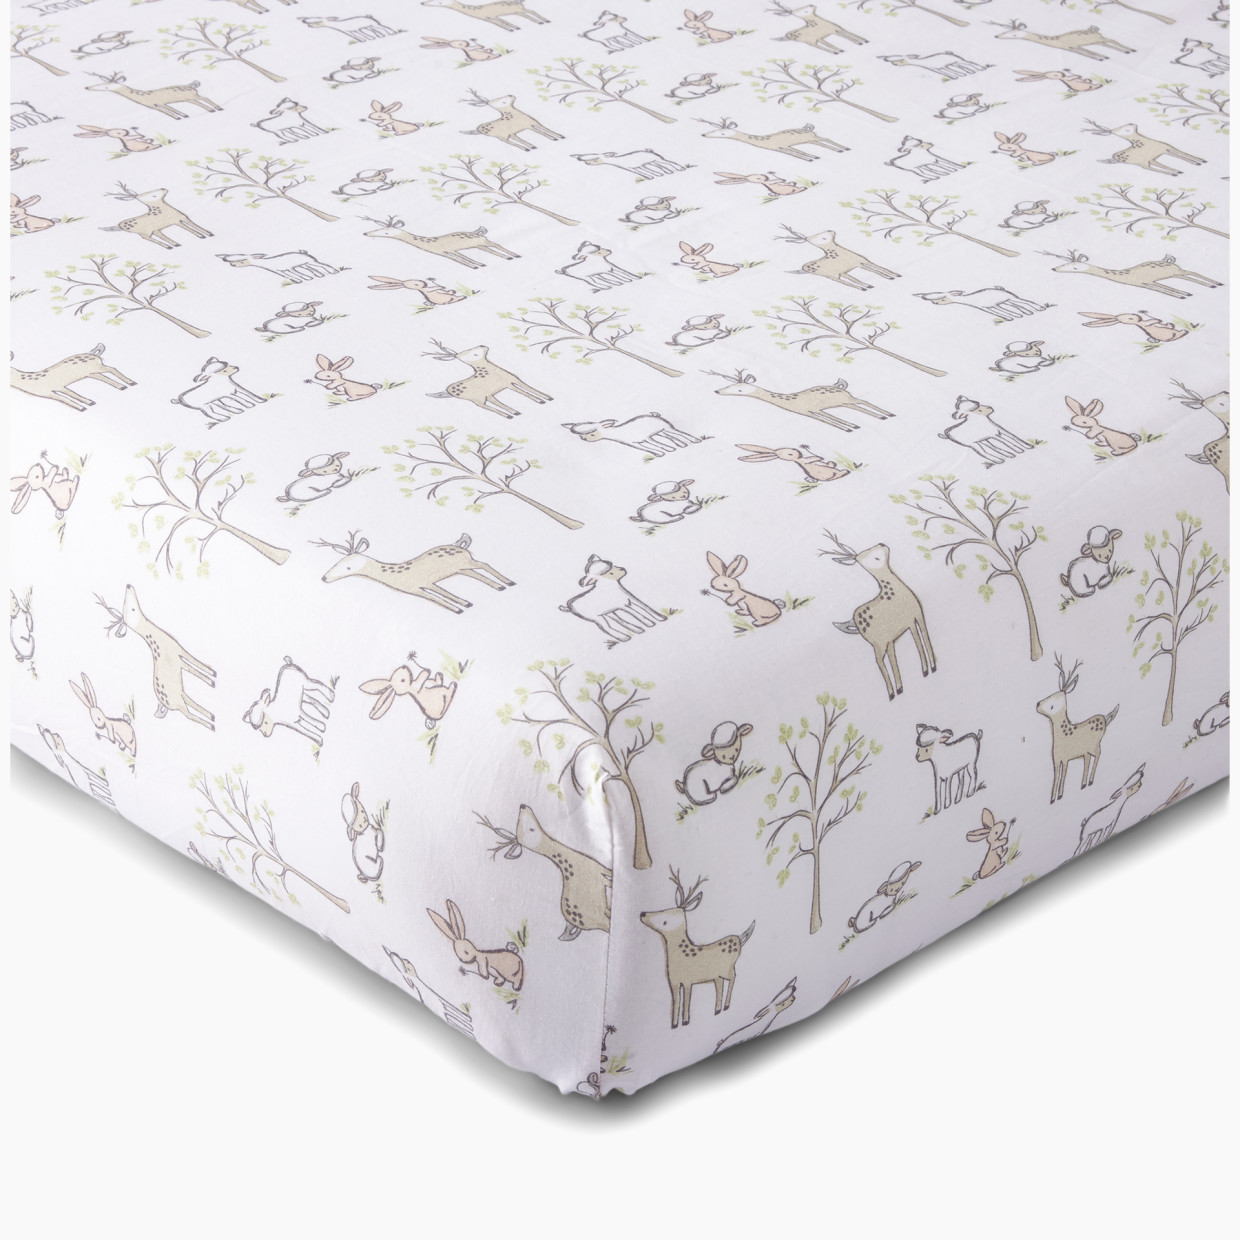 Levtex Baby Fitted Crib Sheet - Skylar Character.